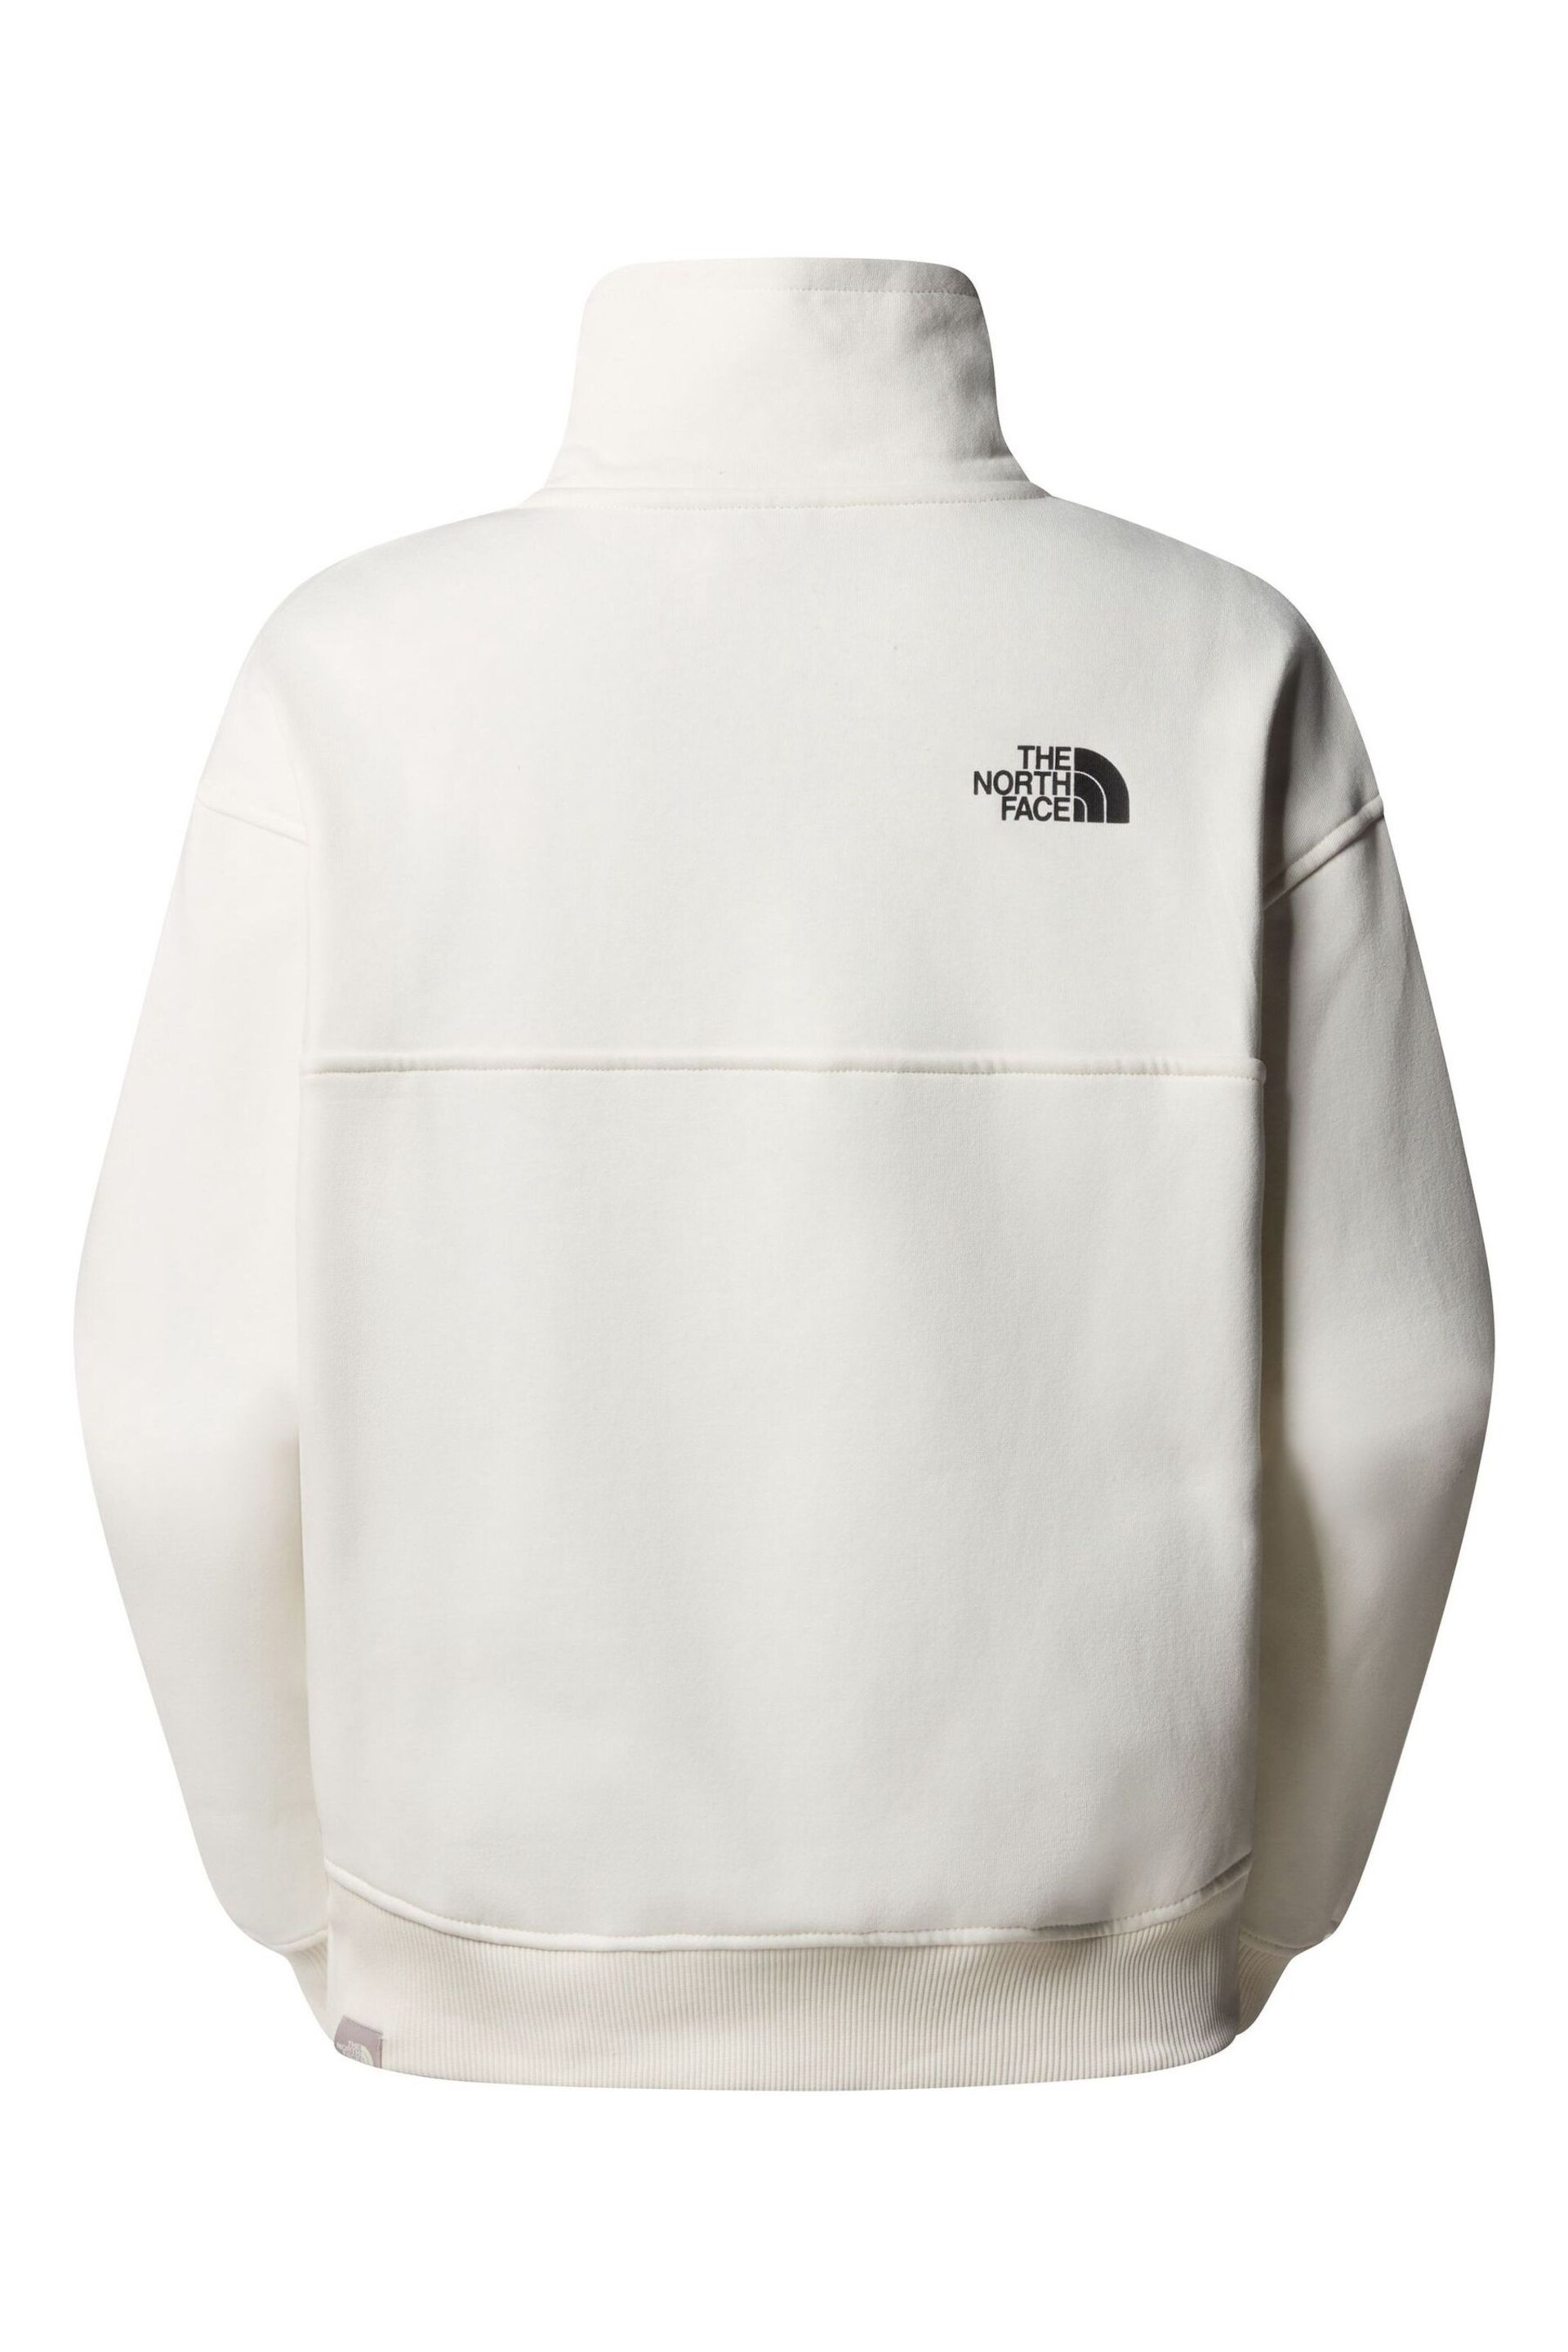 The North Face Grey Essential 1/4 Zip Sweater - Image 2 of 2